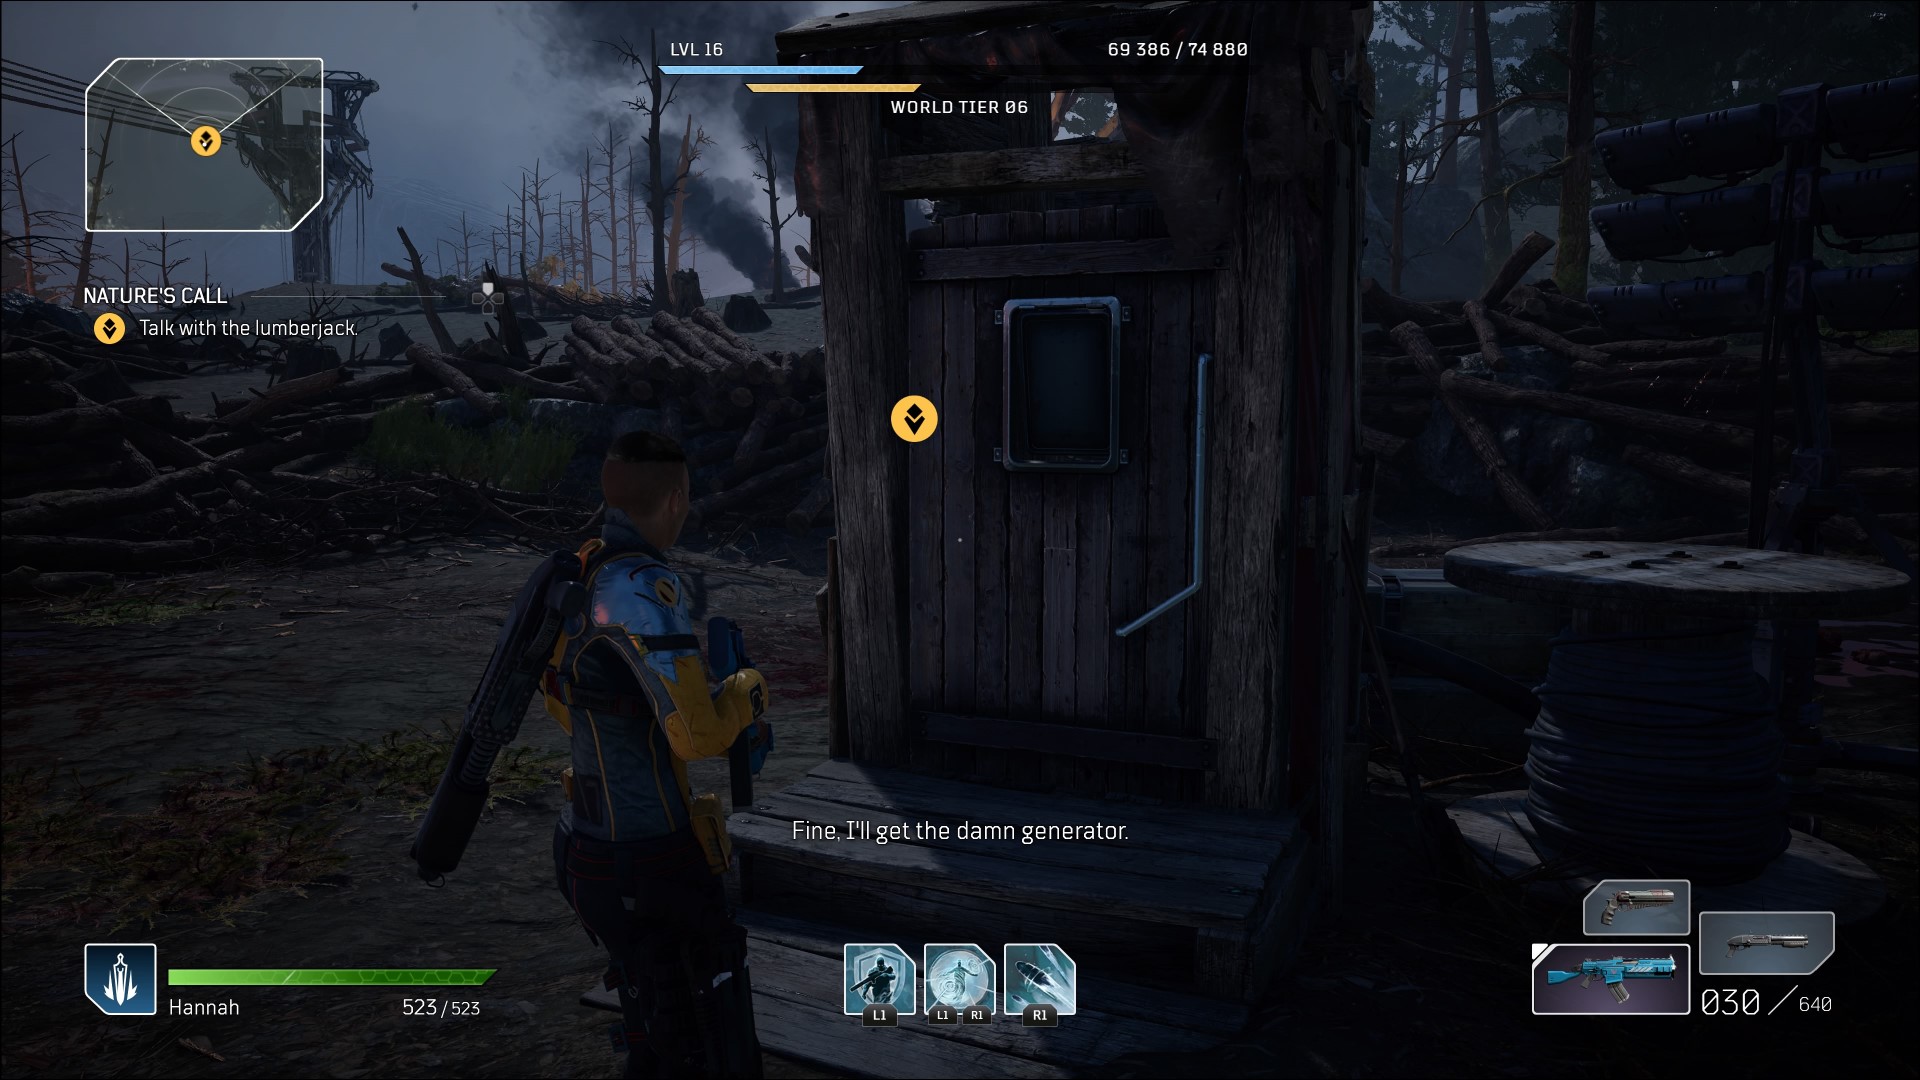 An Outrider trying to coax a man out of an outhouse